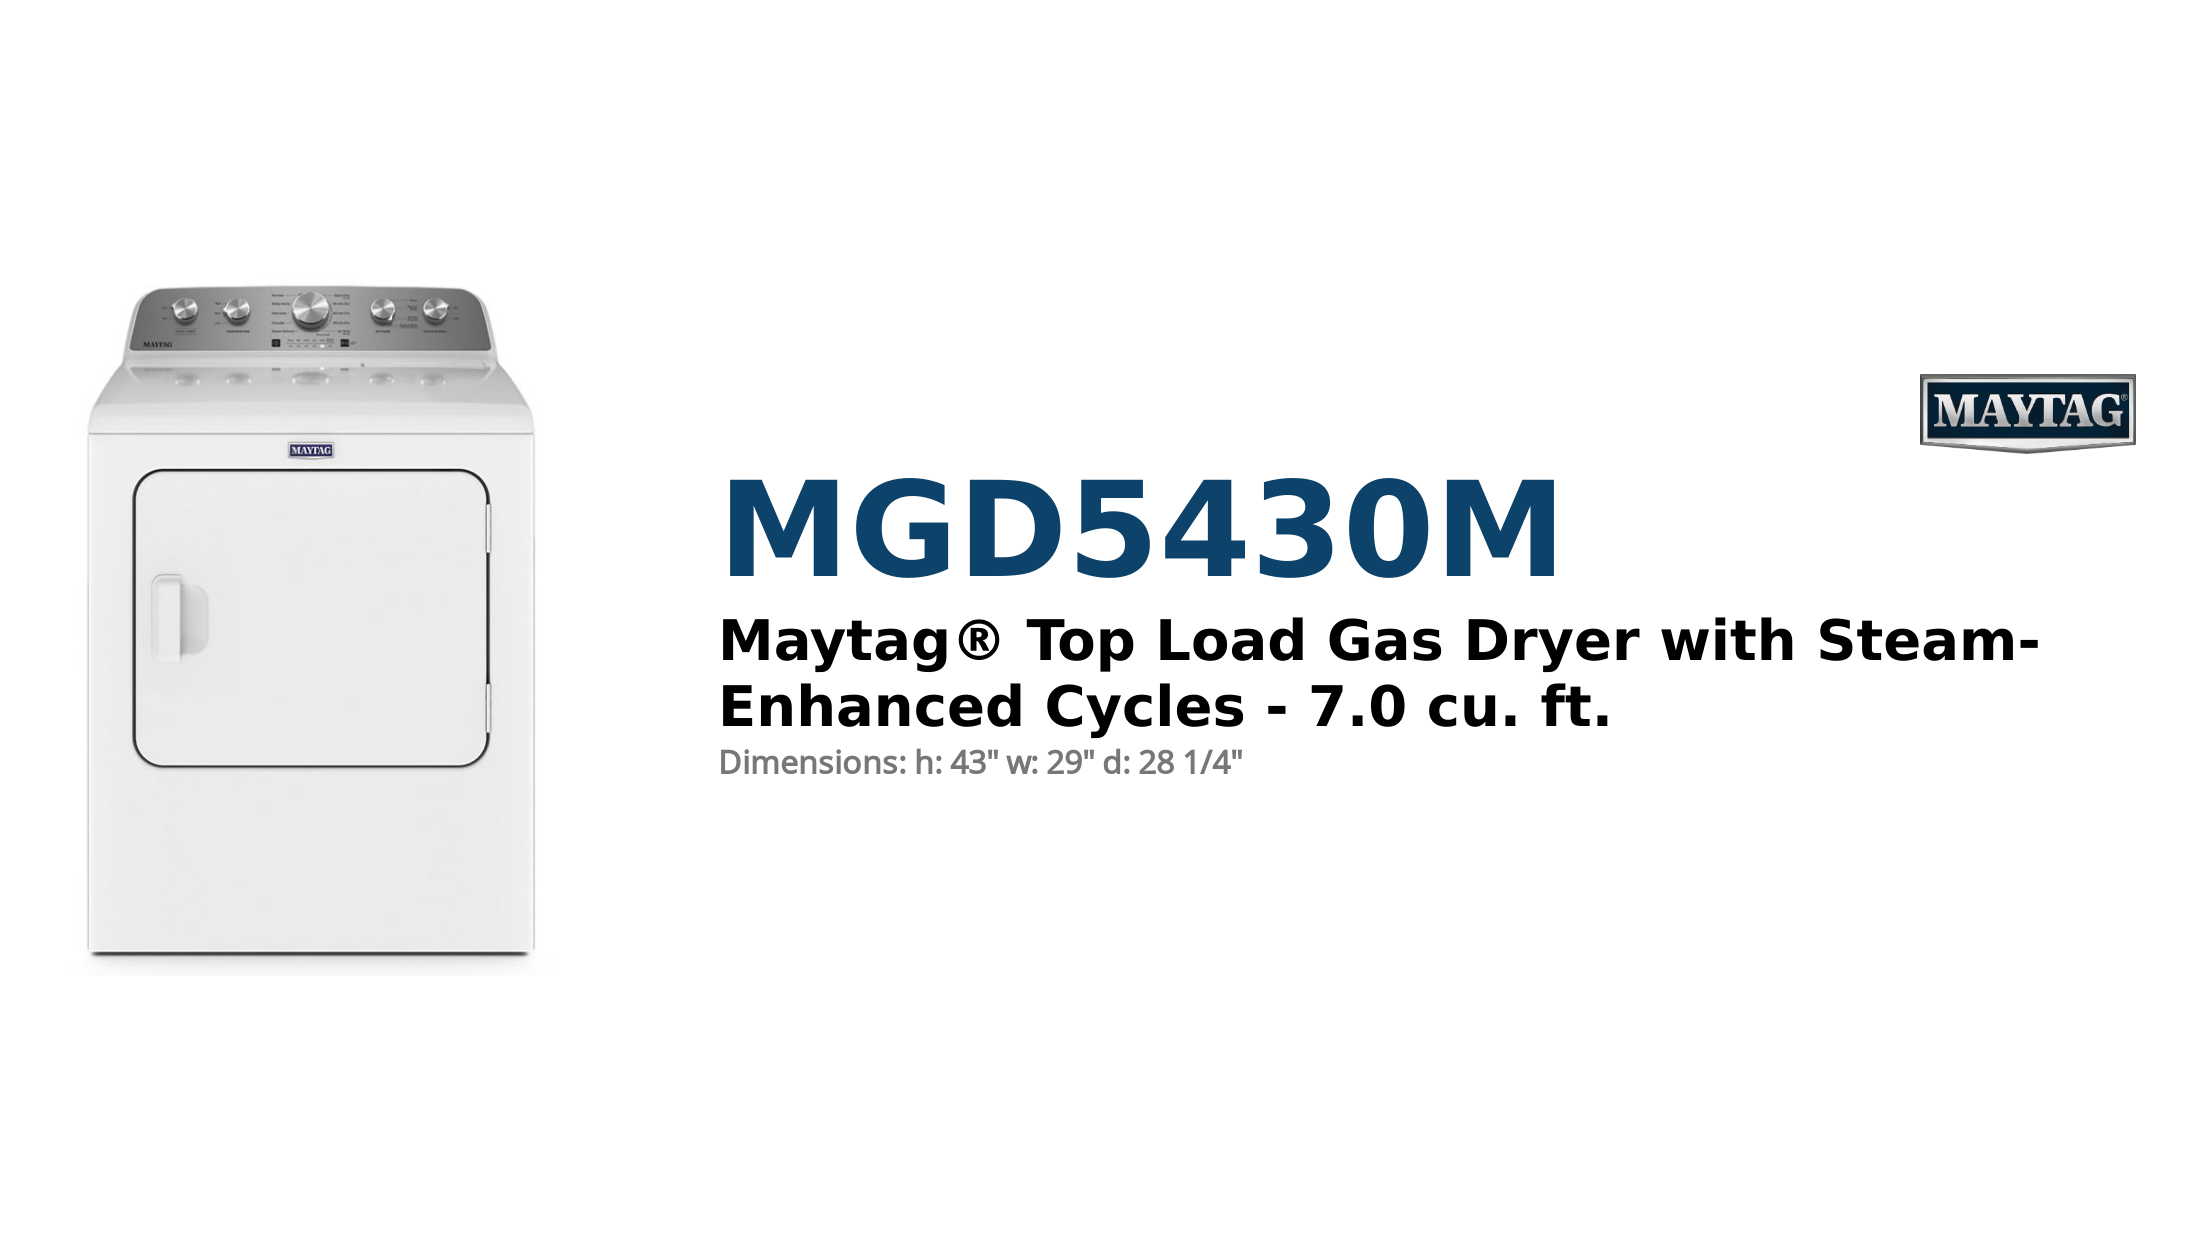 Maytag® Top Load Gas Dryer with Steam-Enhanced Cycles - 7.0 cu. ft.